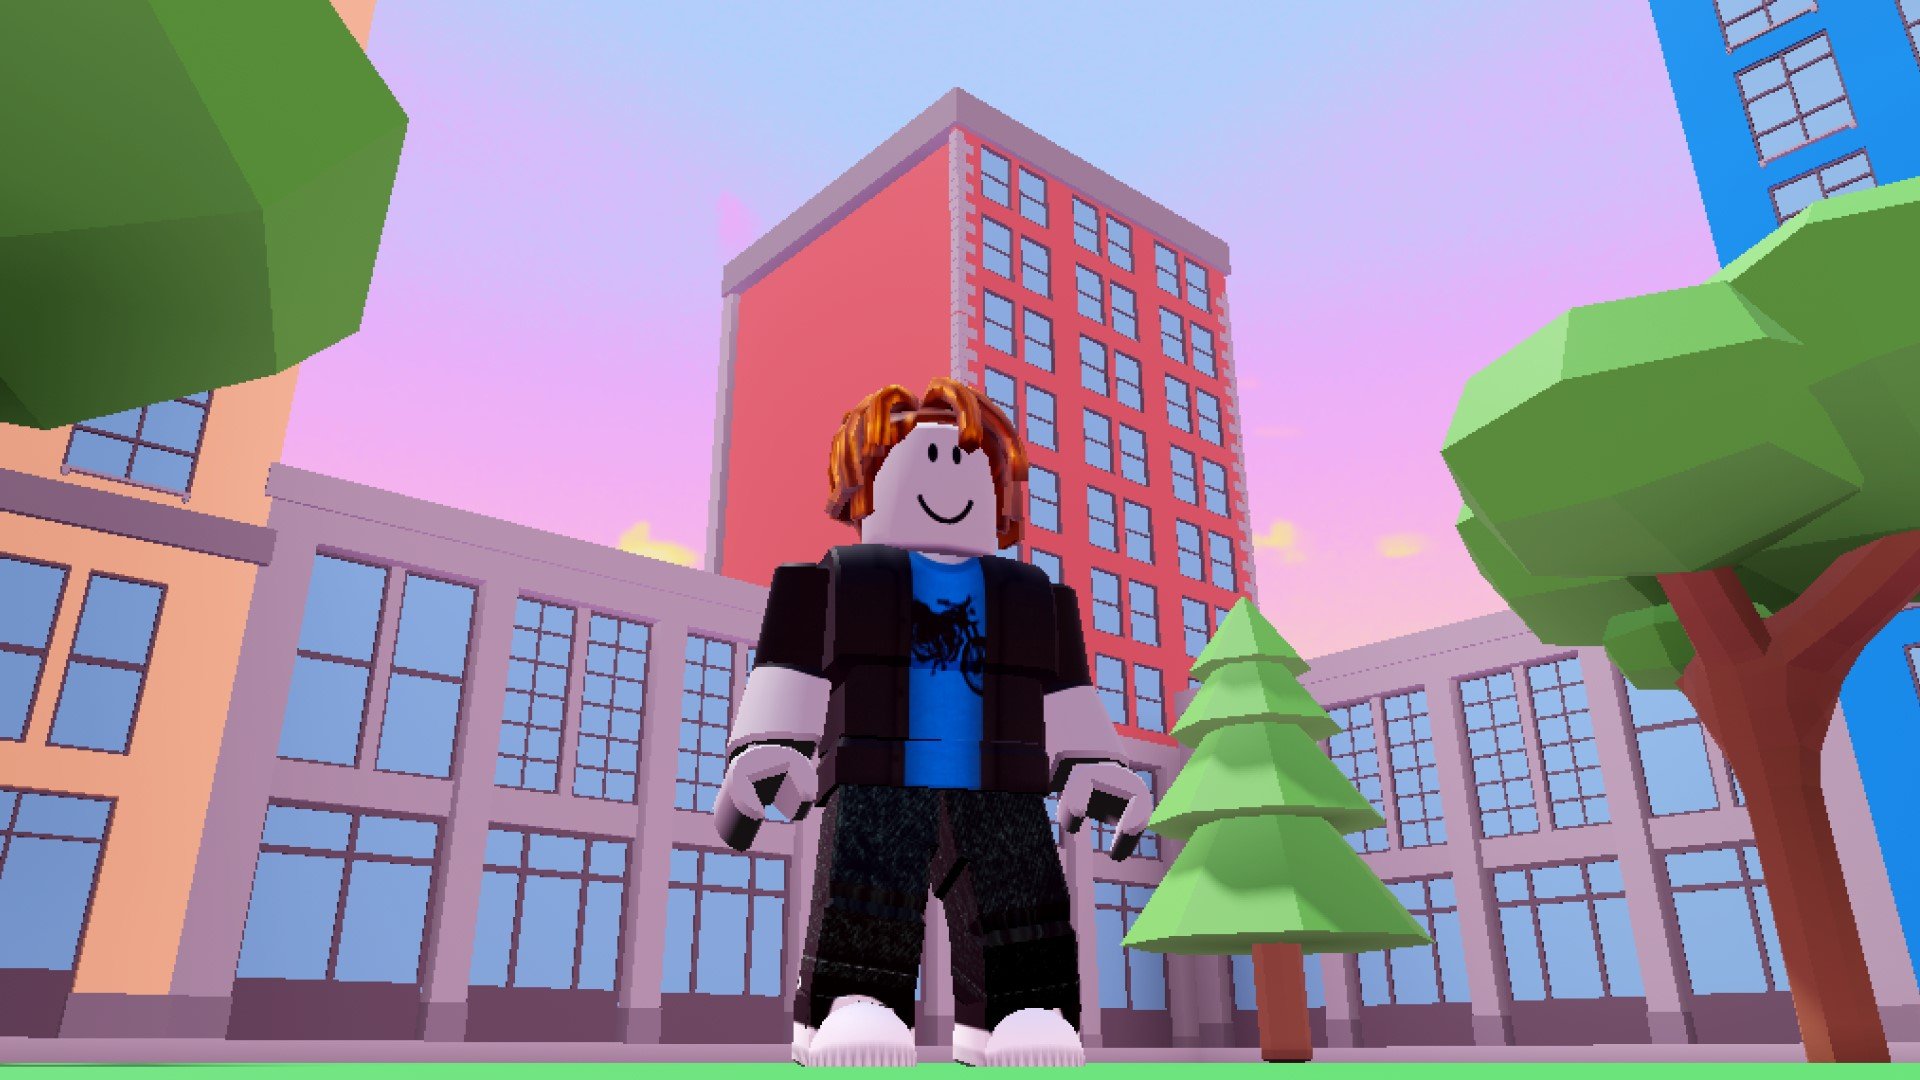 A character from the Roblox game Pop Bubbles For UGC stands in front of a city scene. Colourful trees and buildings can be seen in the background.